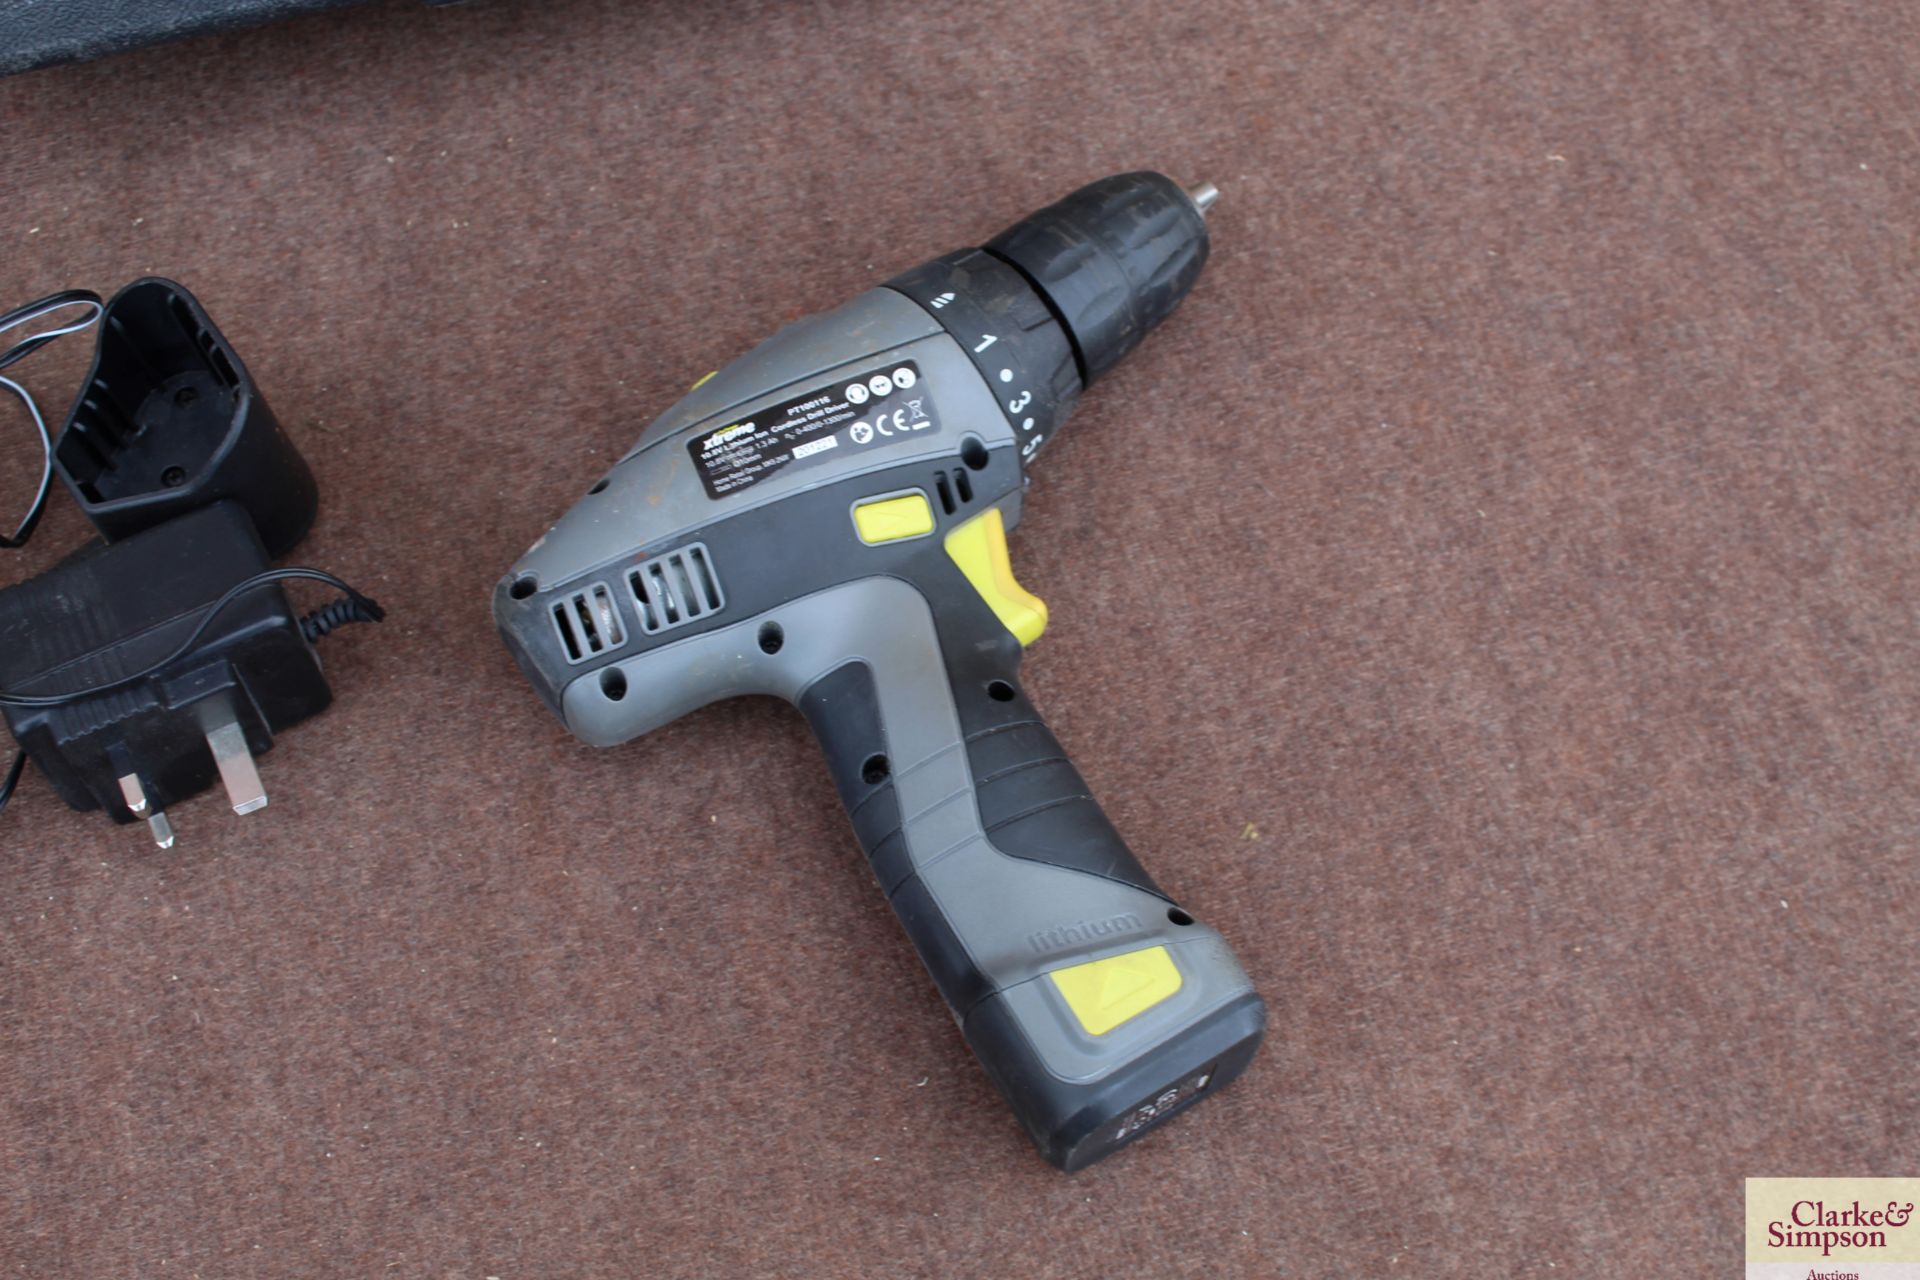 Challenge Xtreme PT100116 10.8v cordless drill with battery and charger in case. - Image 3 of 5